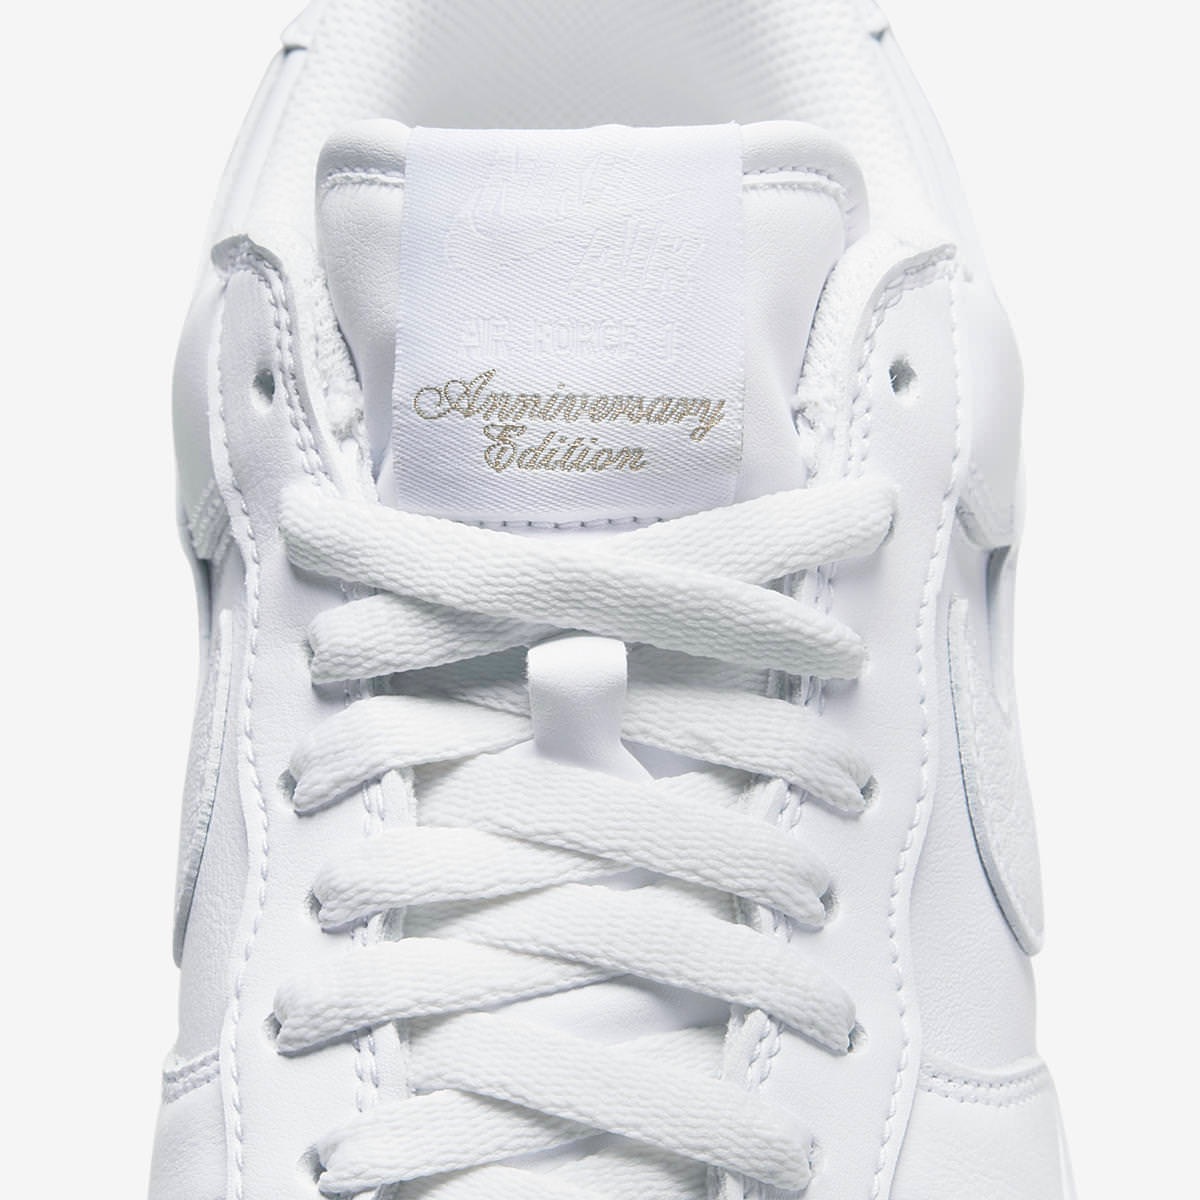 Nike Air Force 1 Low Retro Anniversary Edition “Since 1982.” White